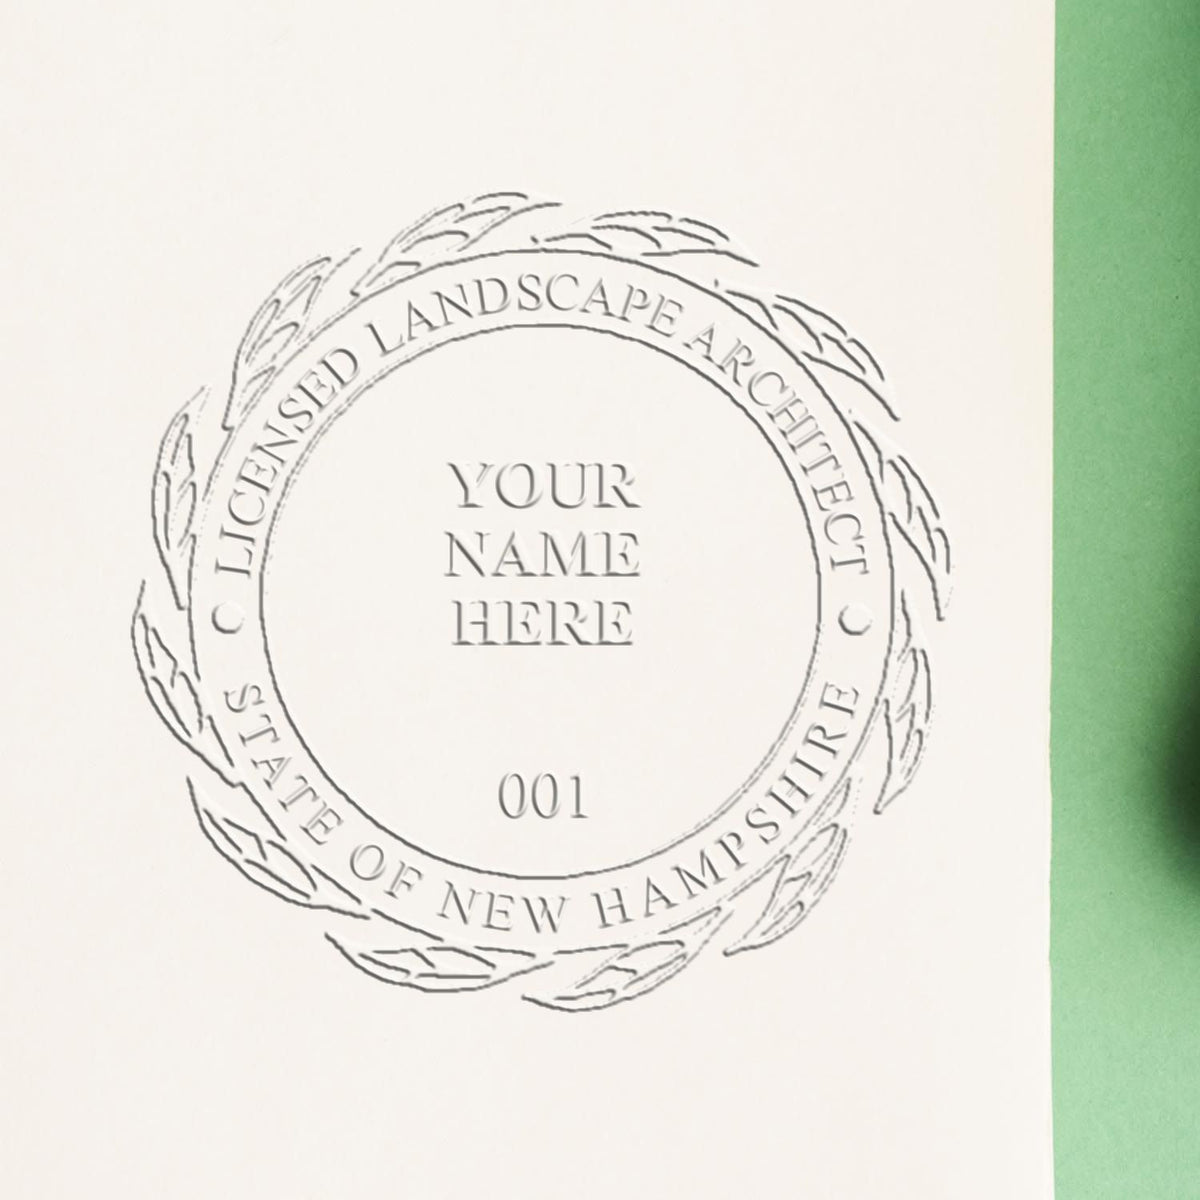 The Gift New Hampshire Landscape Architect Seal stamp impression comes to life with a crisp, detailed image stamped on paper - showcasing true professional quality.